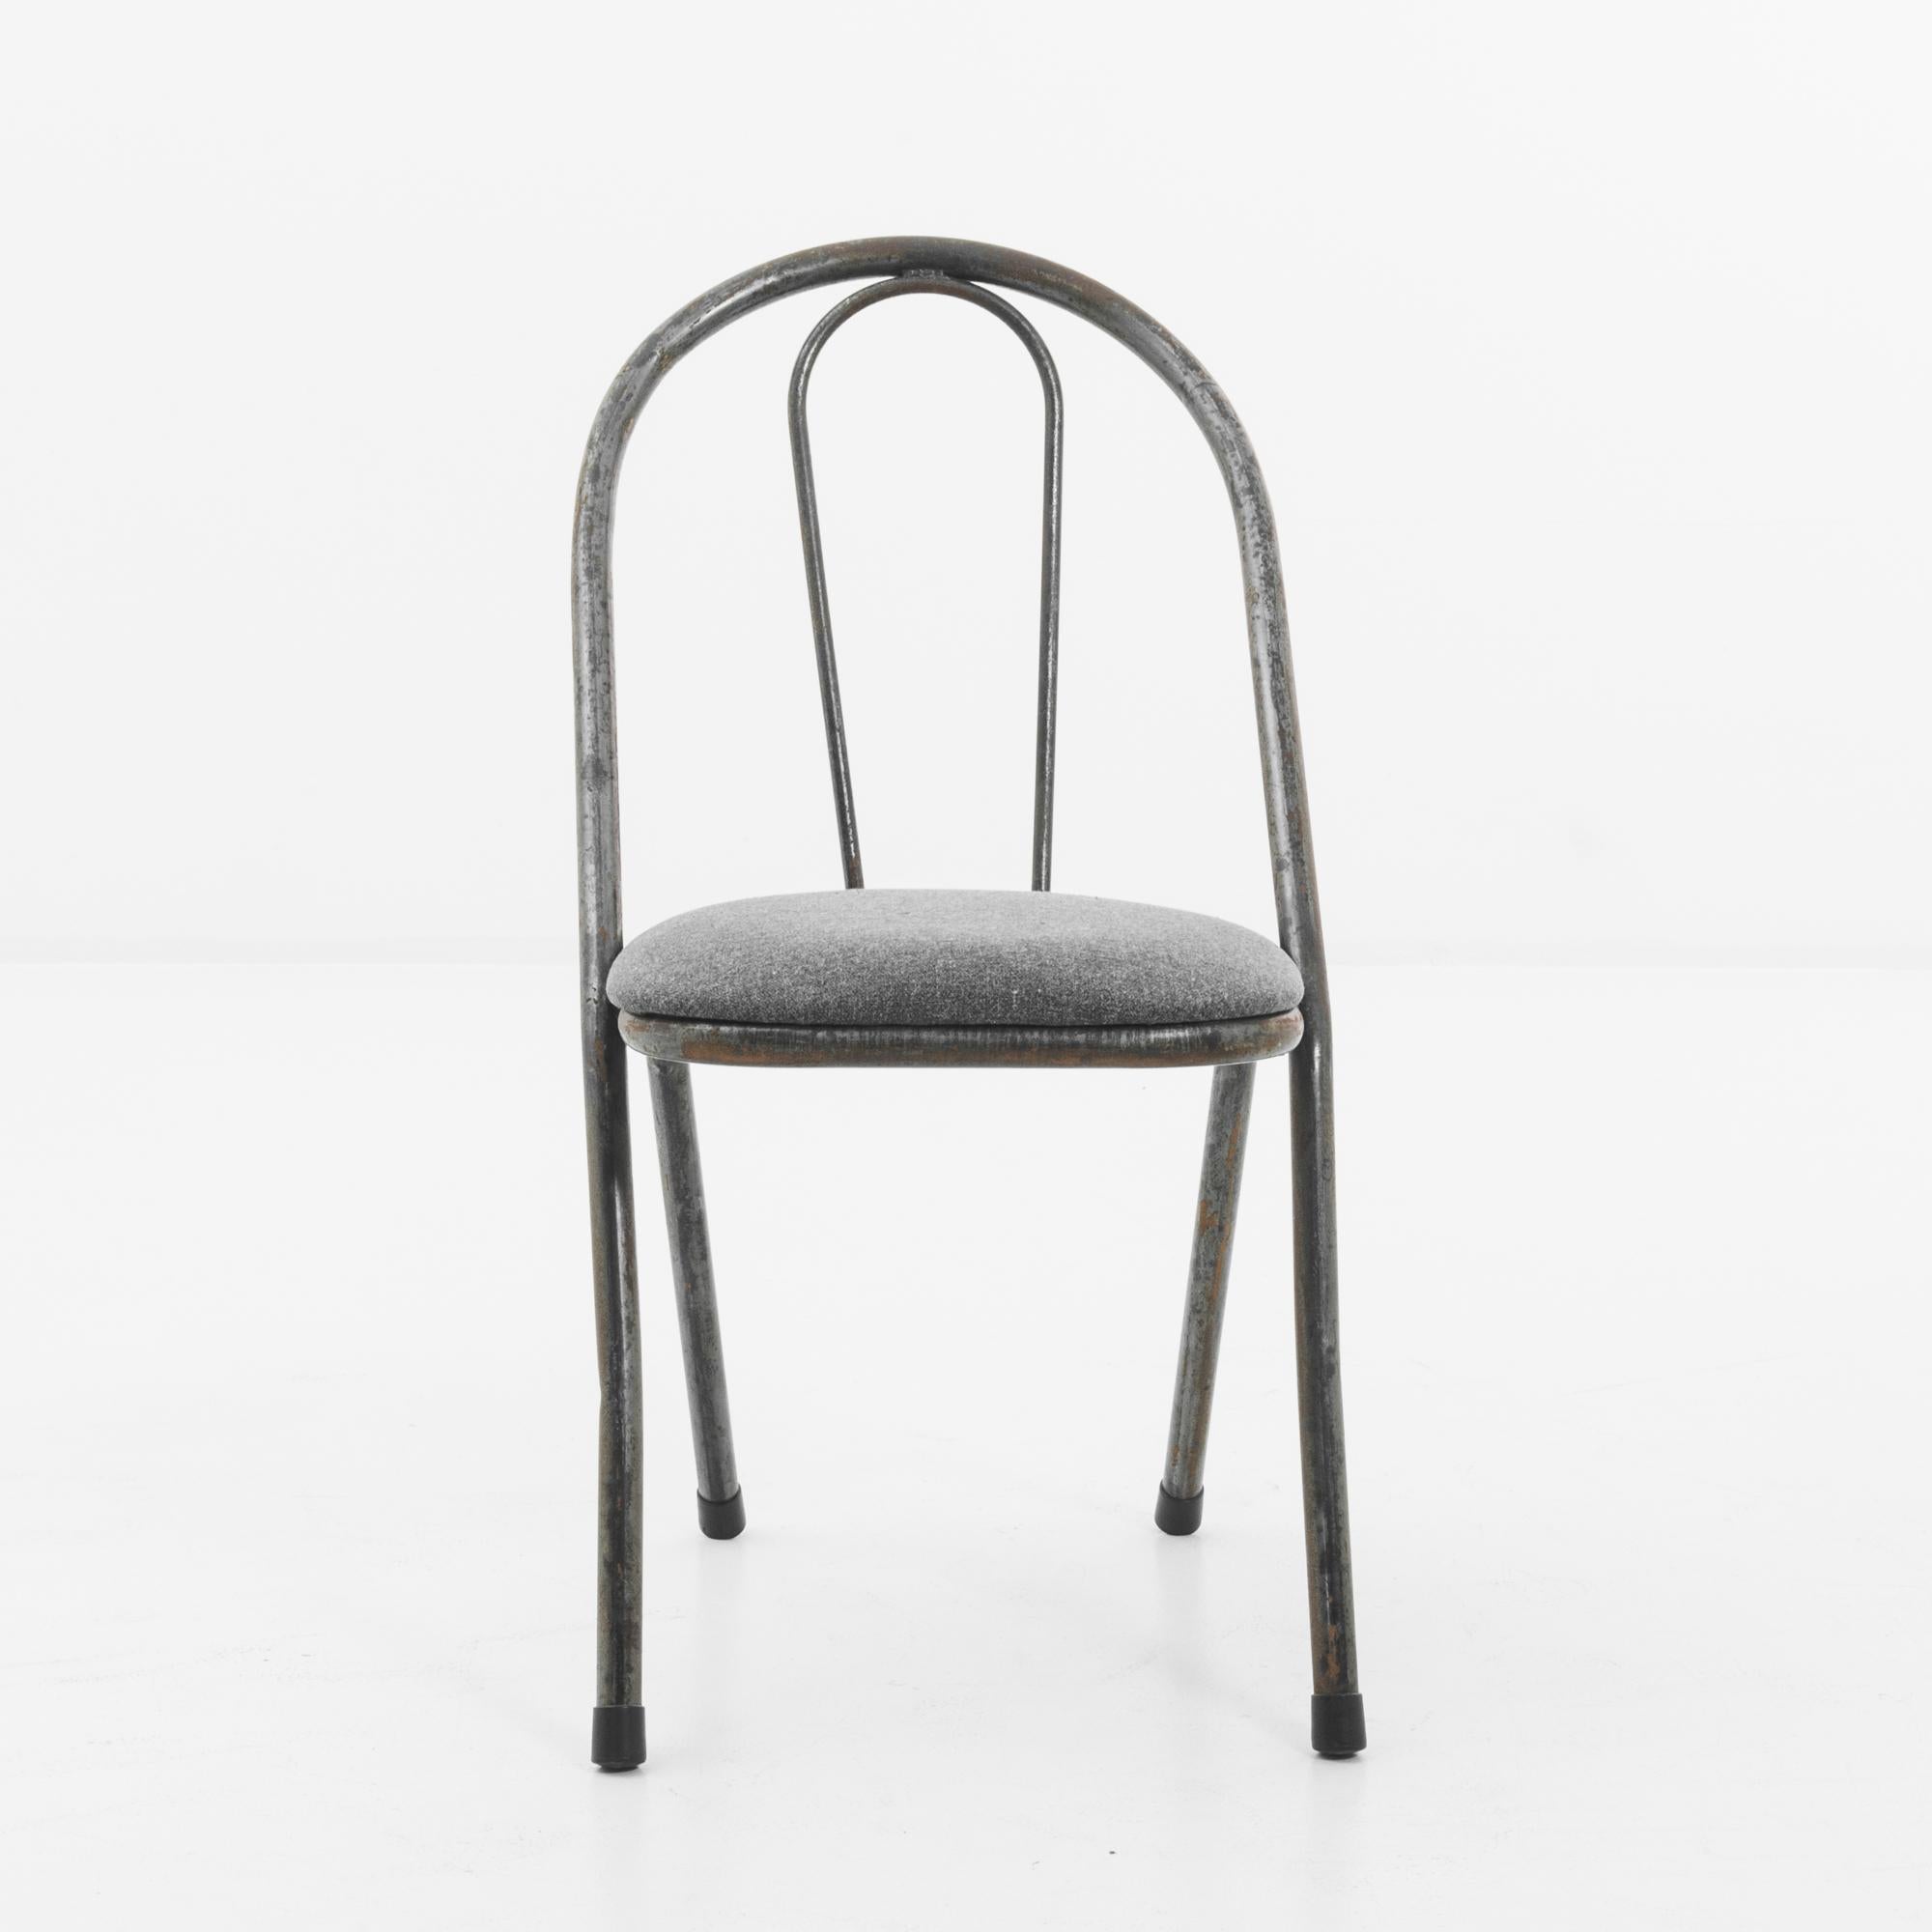 A metal chair from the United Kingdom, produced circa 1950. A chair’s chair, Windsor inflected; two main stalks of bent metal with rubber tipped feet curled around a soft cushion in a light charcoal gray. Hearkening to the flannel suits of the